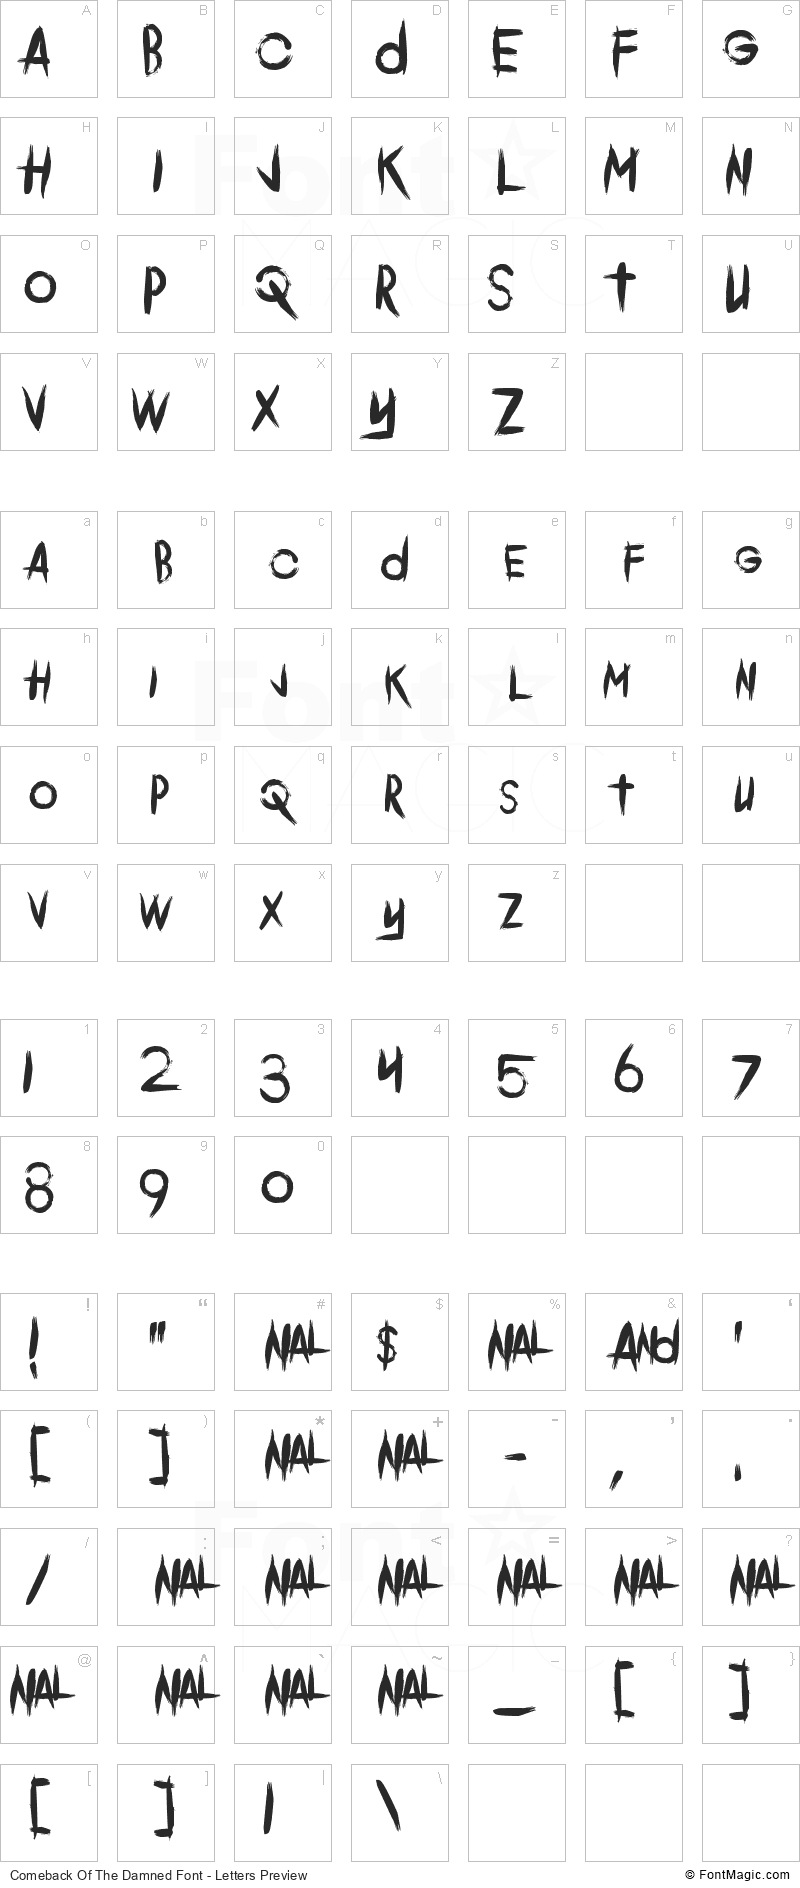 Comeback Of The Damned Font - All Latters Preview Chart